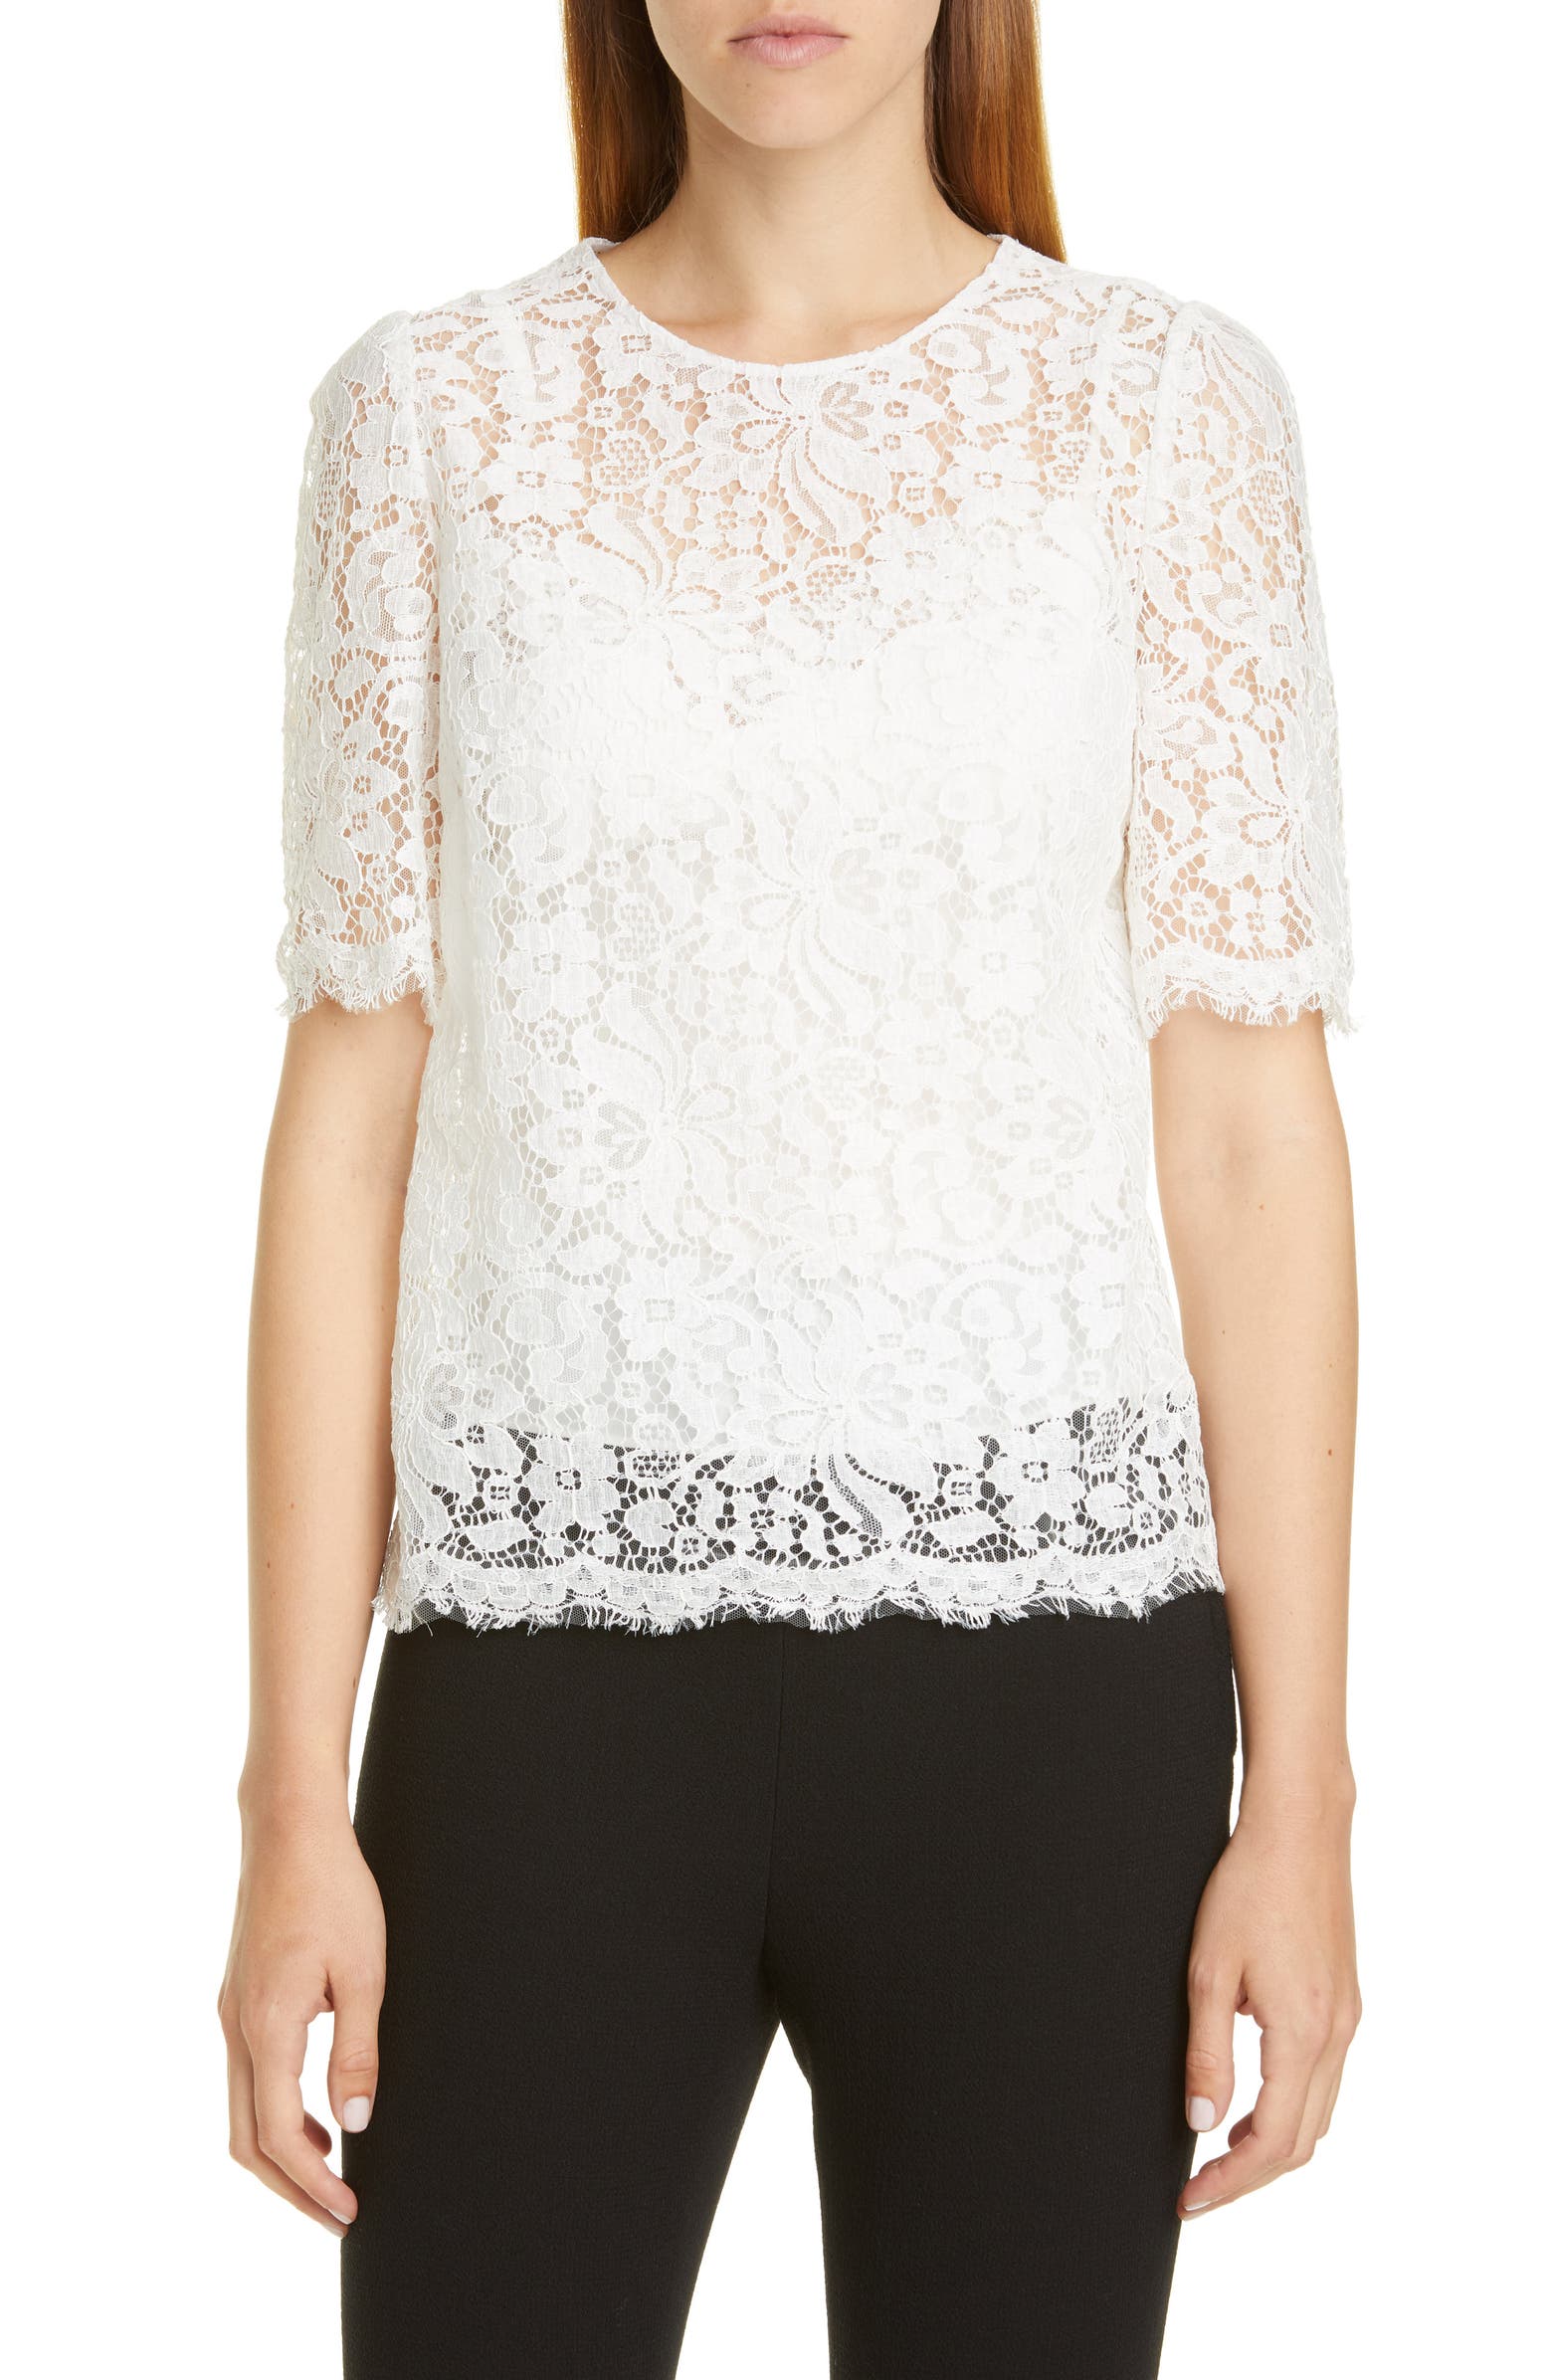 Dolce&Gabbana Lace Top | Nordstrom